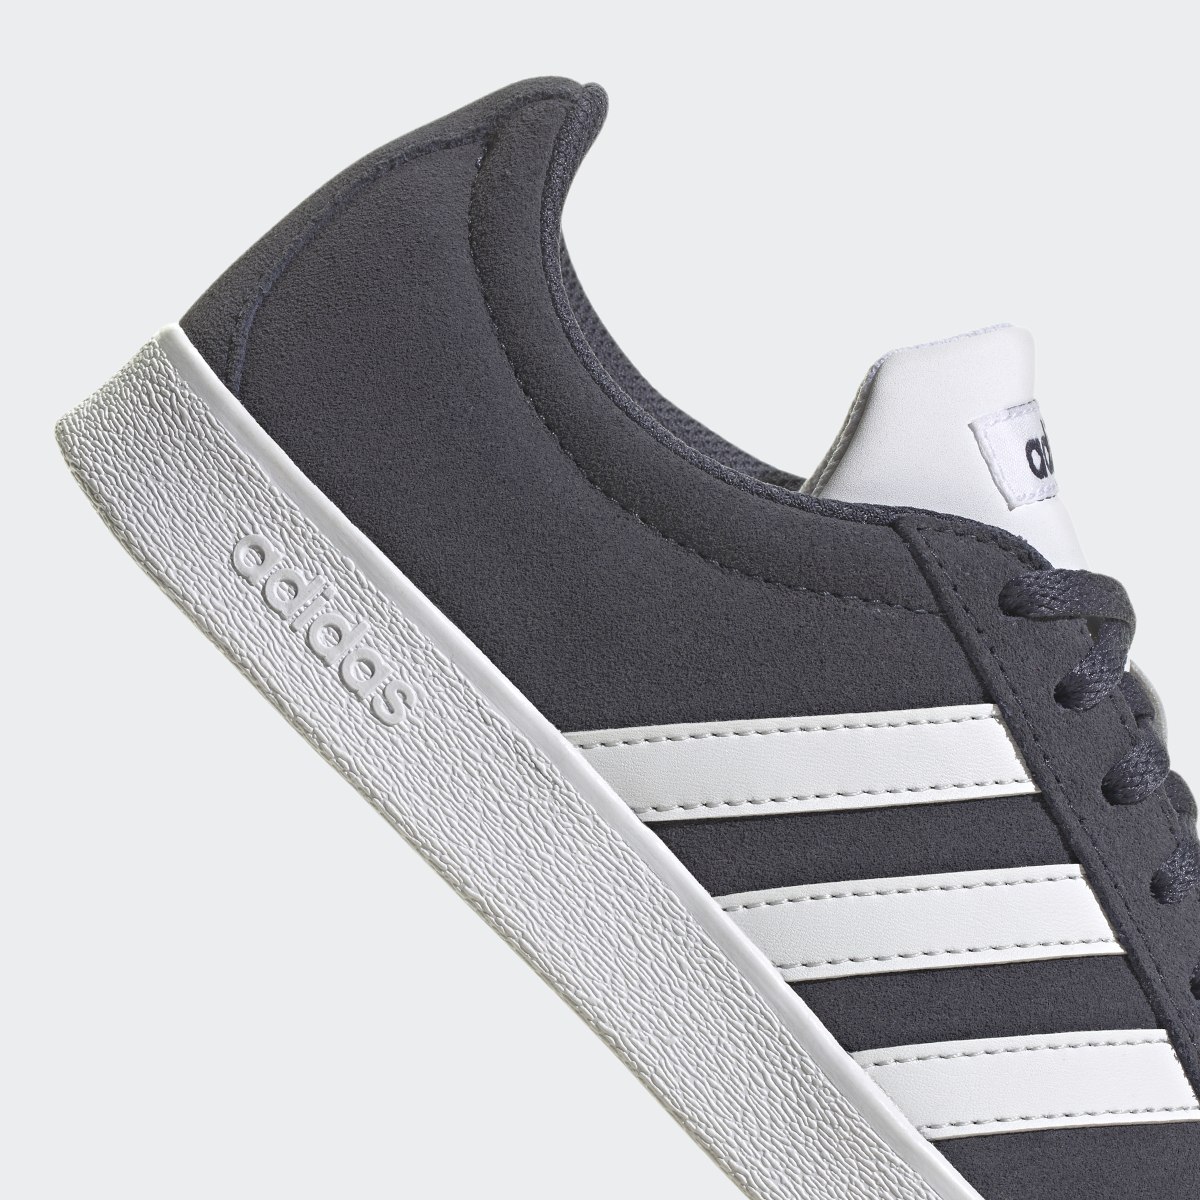 Adidas VL Court 2.0 Suede Shoes. 9